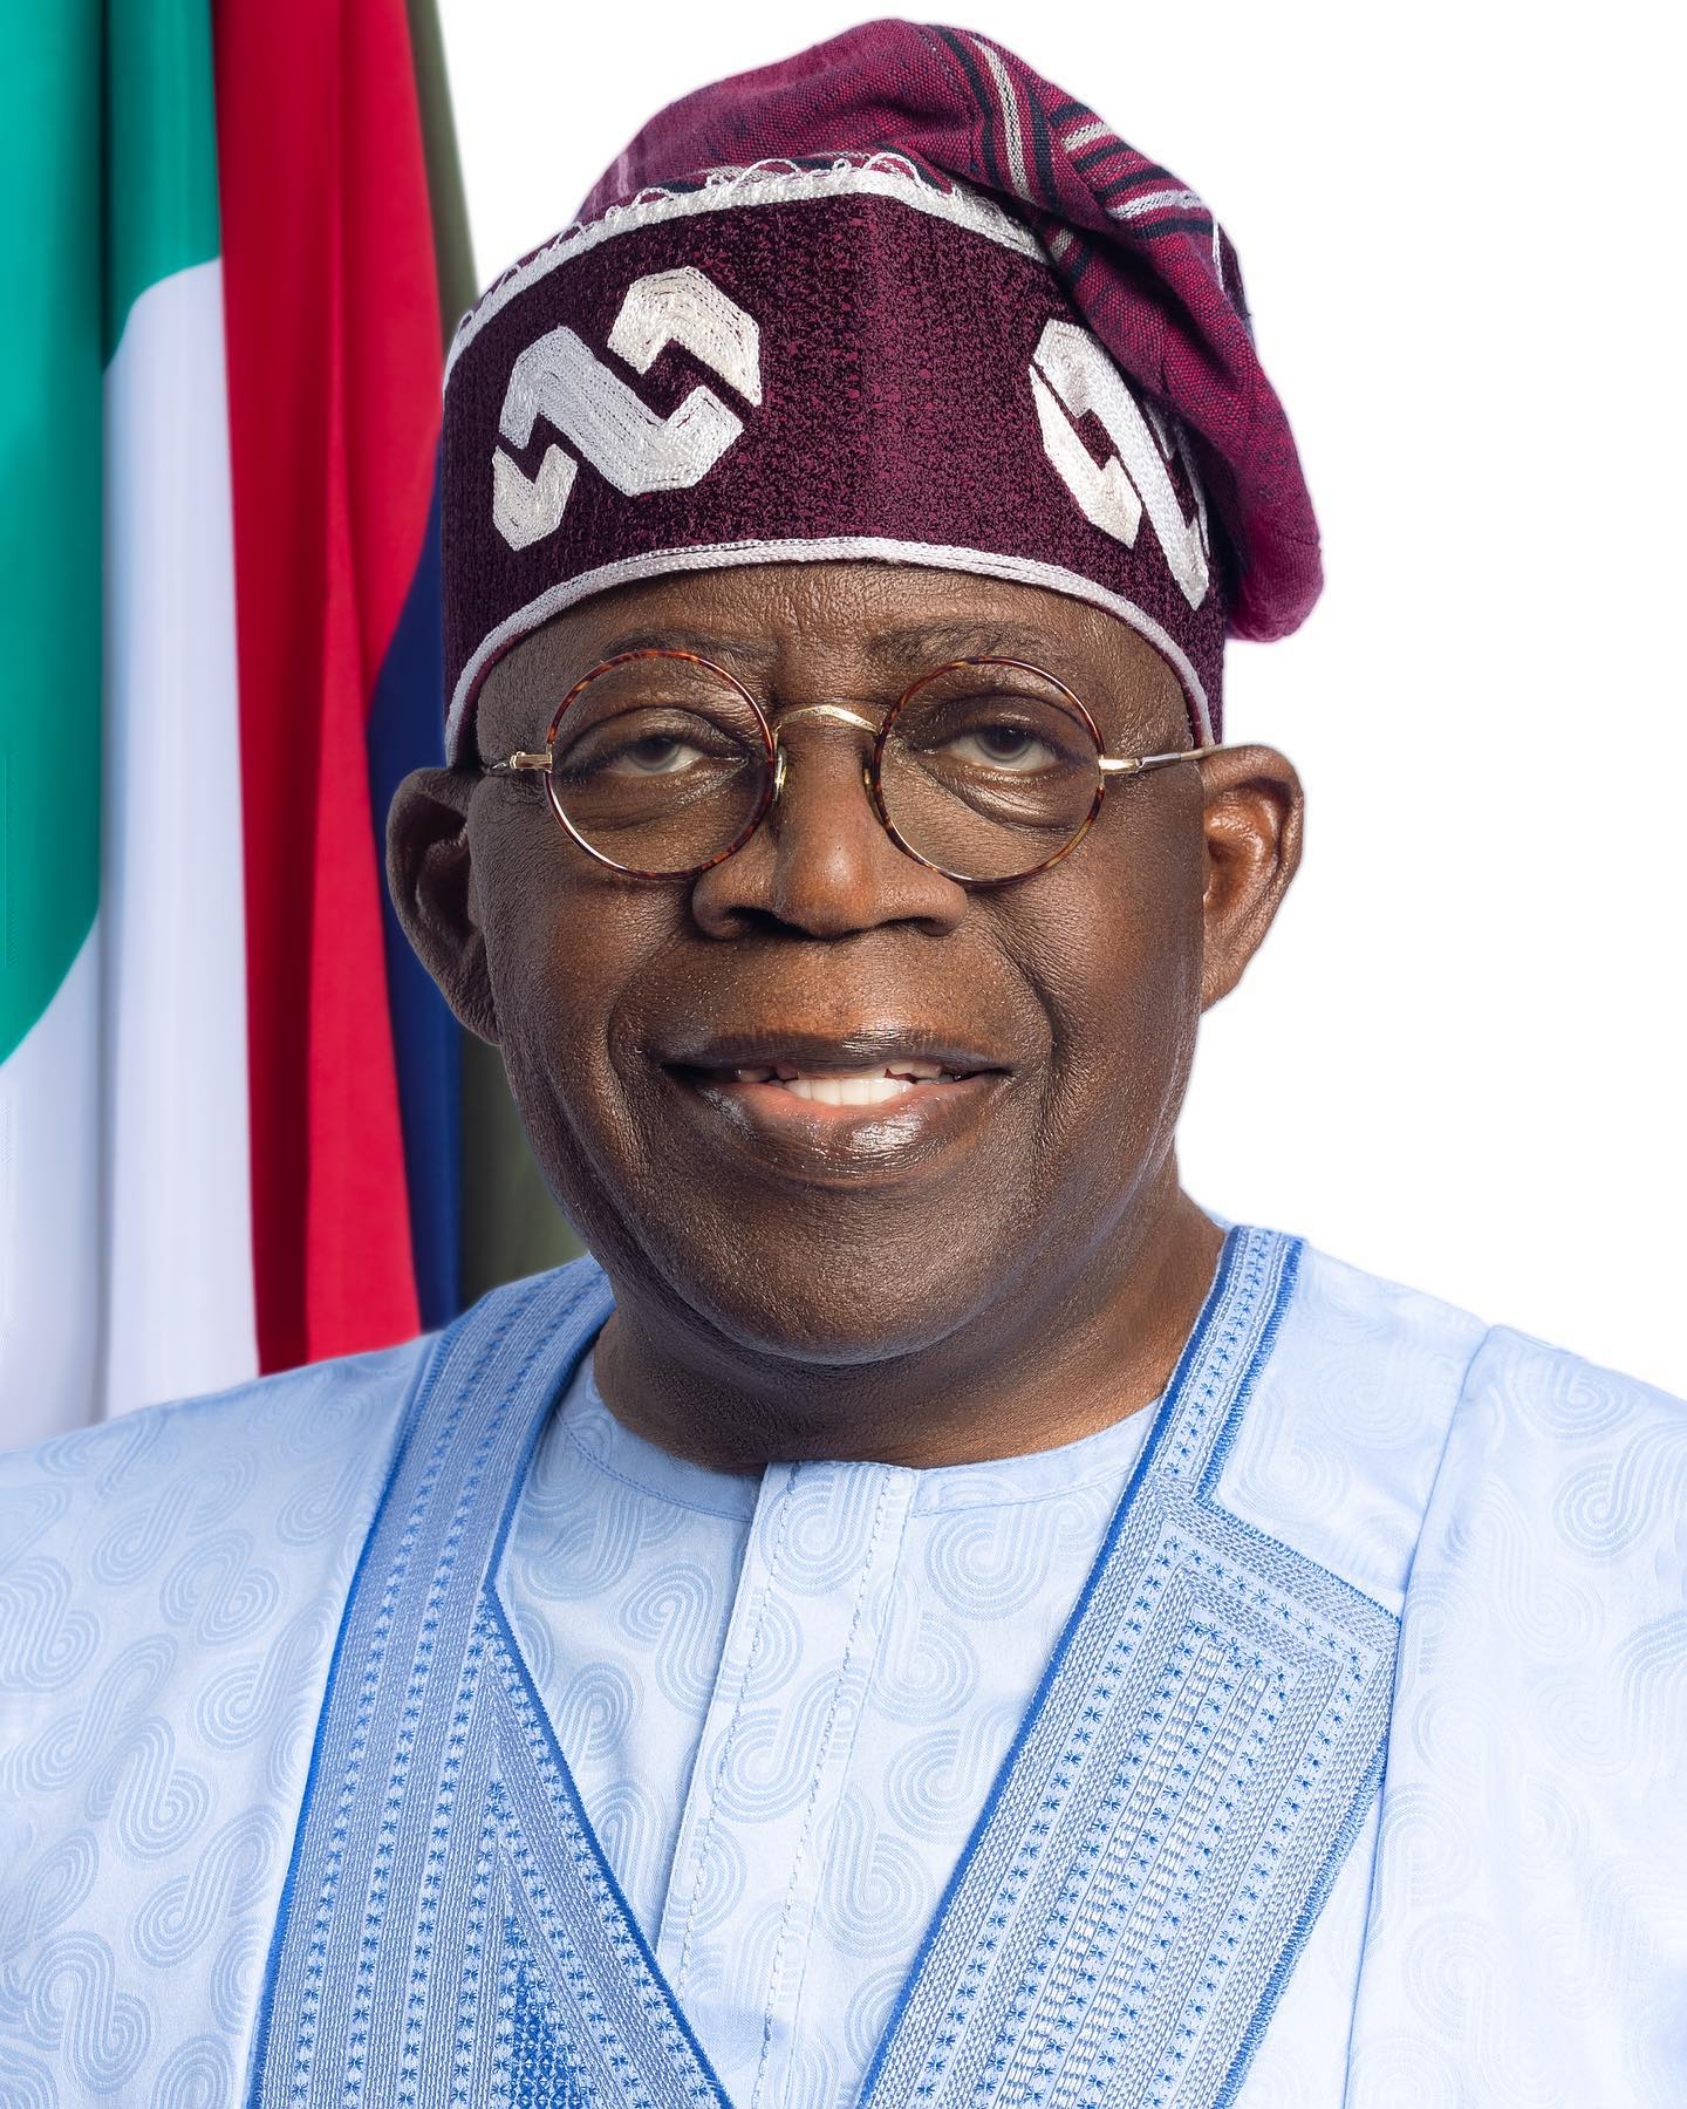 Four Executive Orders are signed by President Tinubu to address the issue of multiple taxation